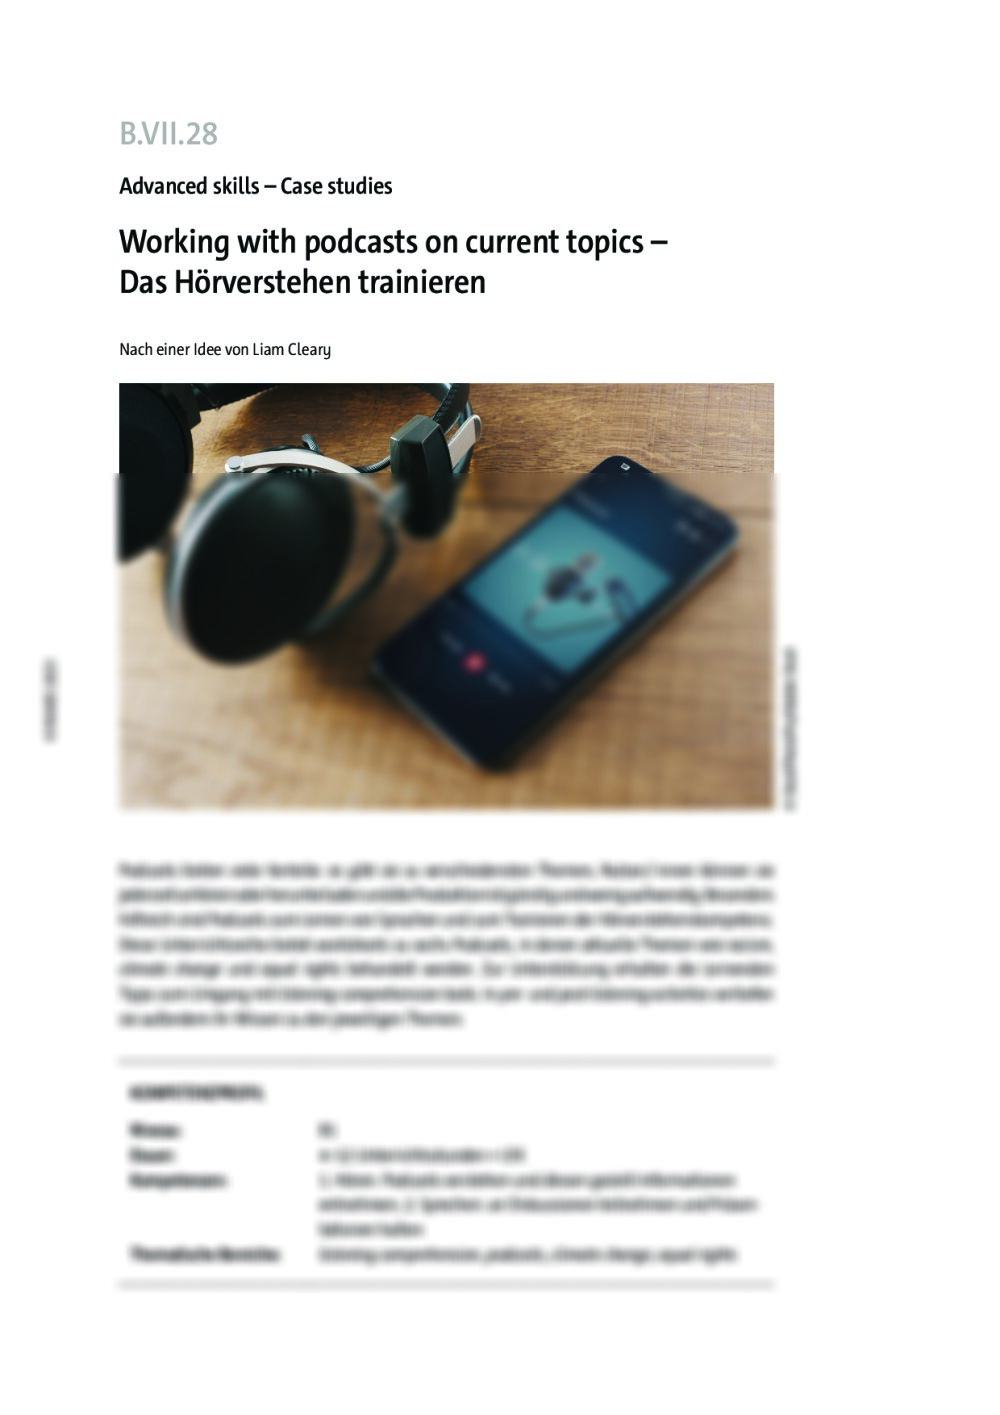 Working with podcasts on current topics - Seite 1